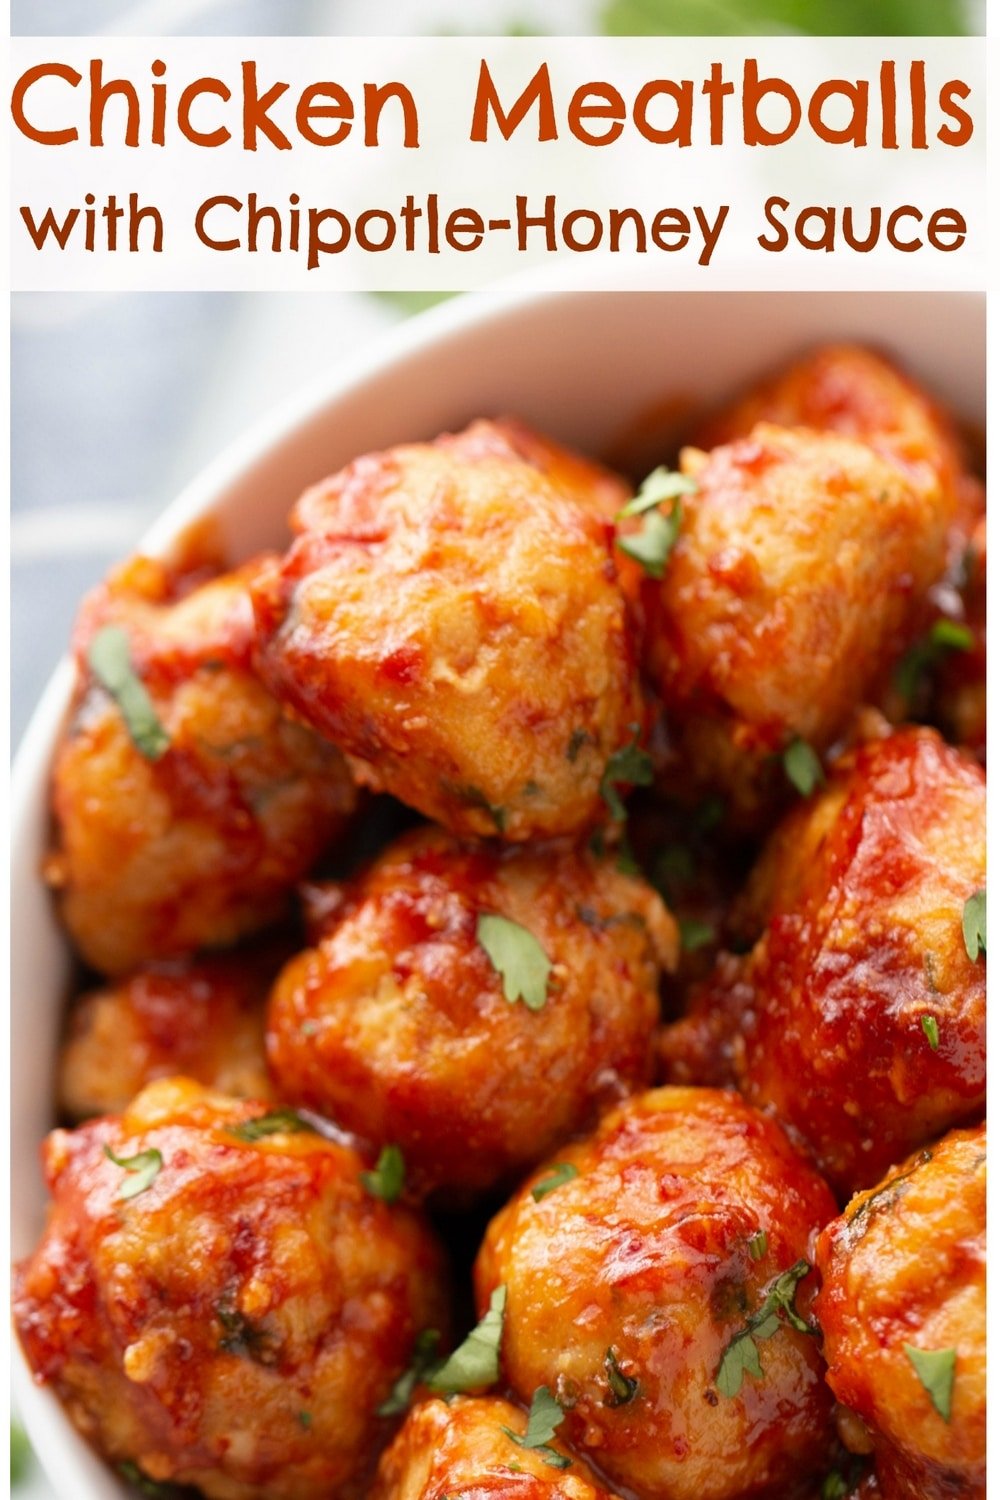 Chicken Meatballs with Chipotle-Honey Sauce - a saucy and sassy chicken meatball recipe you'll serve again and again. Every bite is packed with flavor making them the perfect choice for game day, holidays or a Friday night. via @cmpollak1